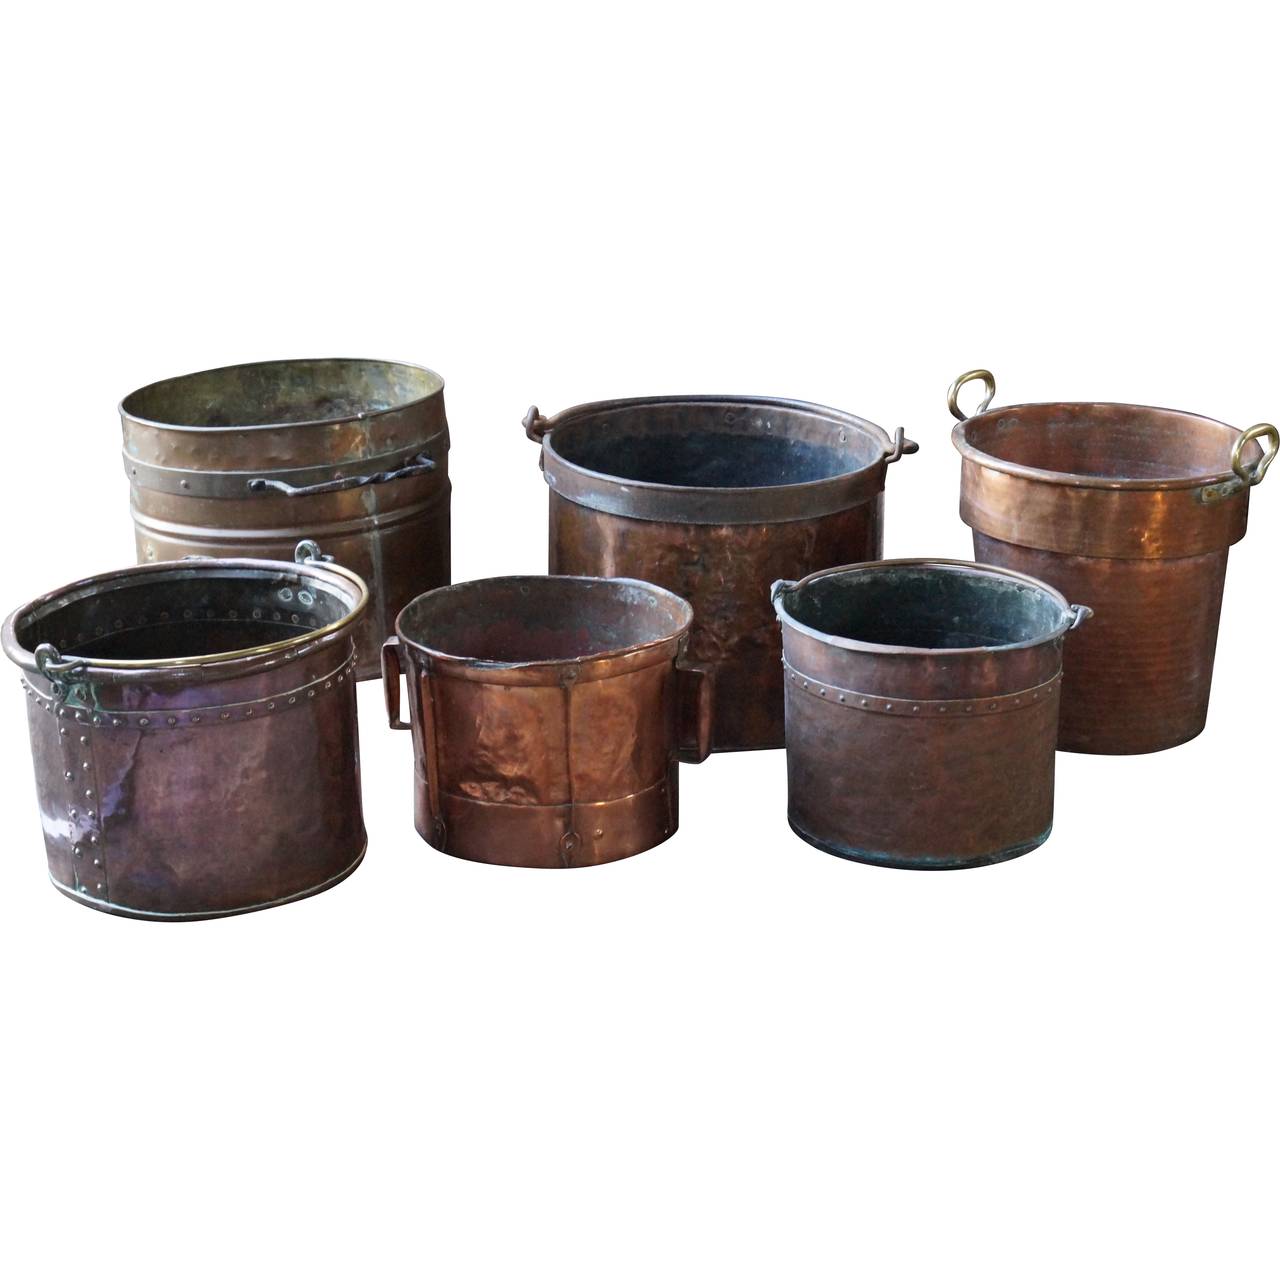 Polished and unpolished copper firewood baskets - log bins, large and small to fit any fireplace. 

We have a unique and specialized collection of antique and used fireplace accessories consisting of more than 1000 listings at 1stdibs. Amongst